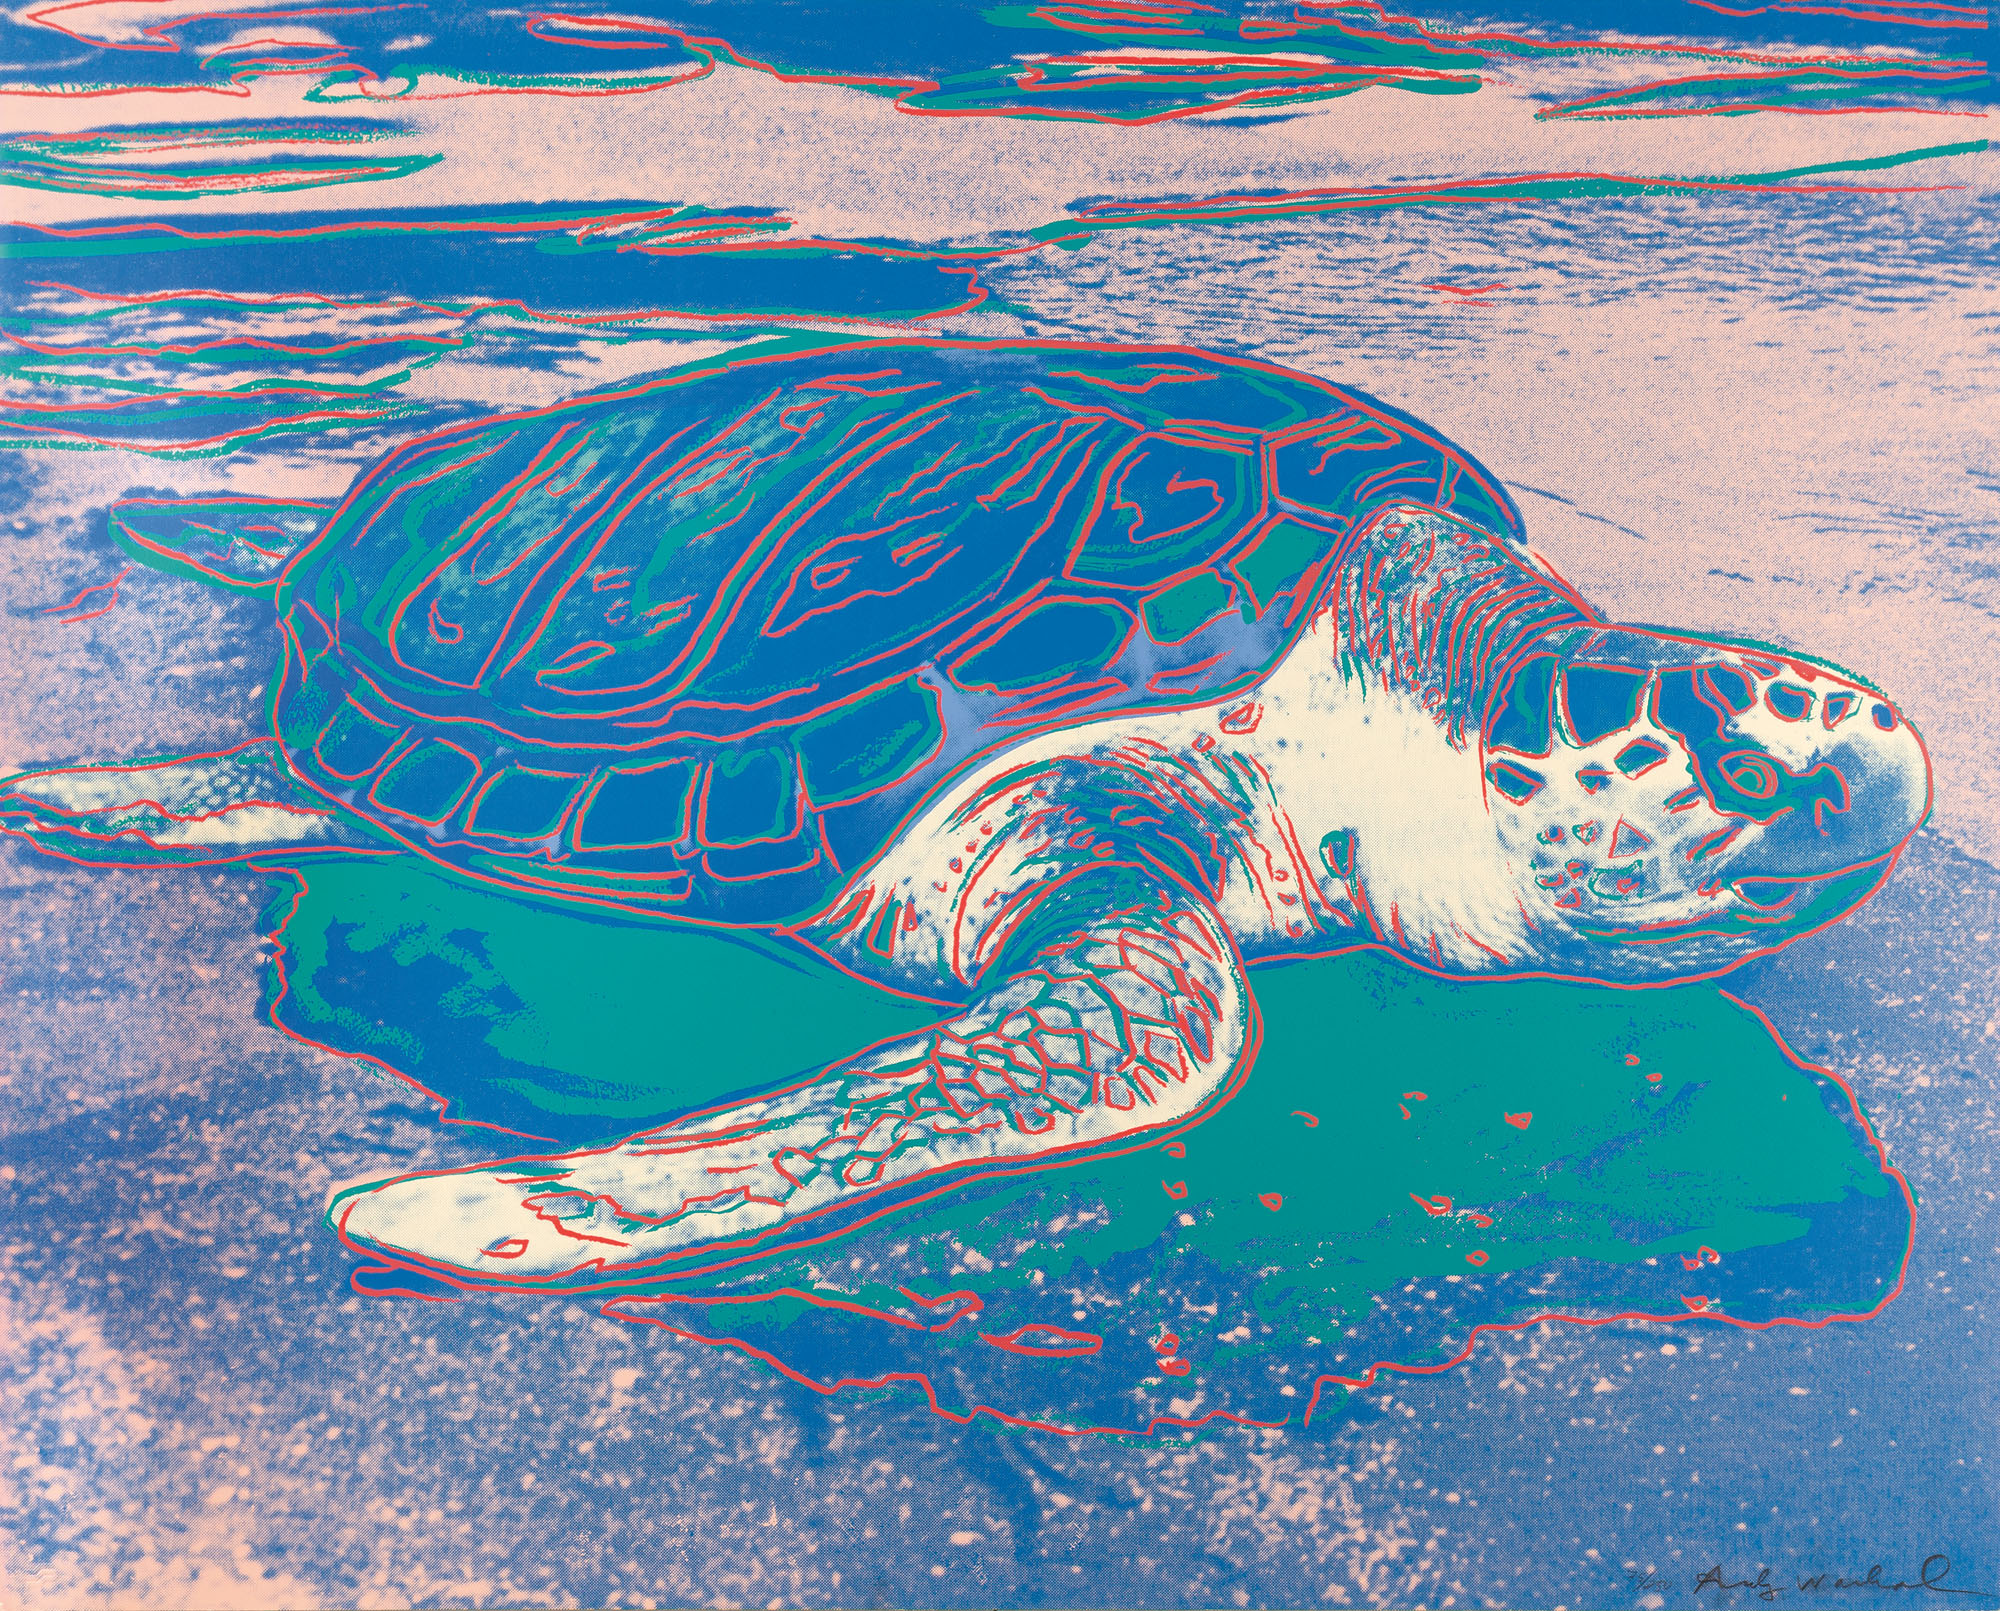 ANDY WARHOL
1928 Pittsburgh - New York 1987

Turtle.
1985
Farbige Serigraphie auf Lenox-Museums-